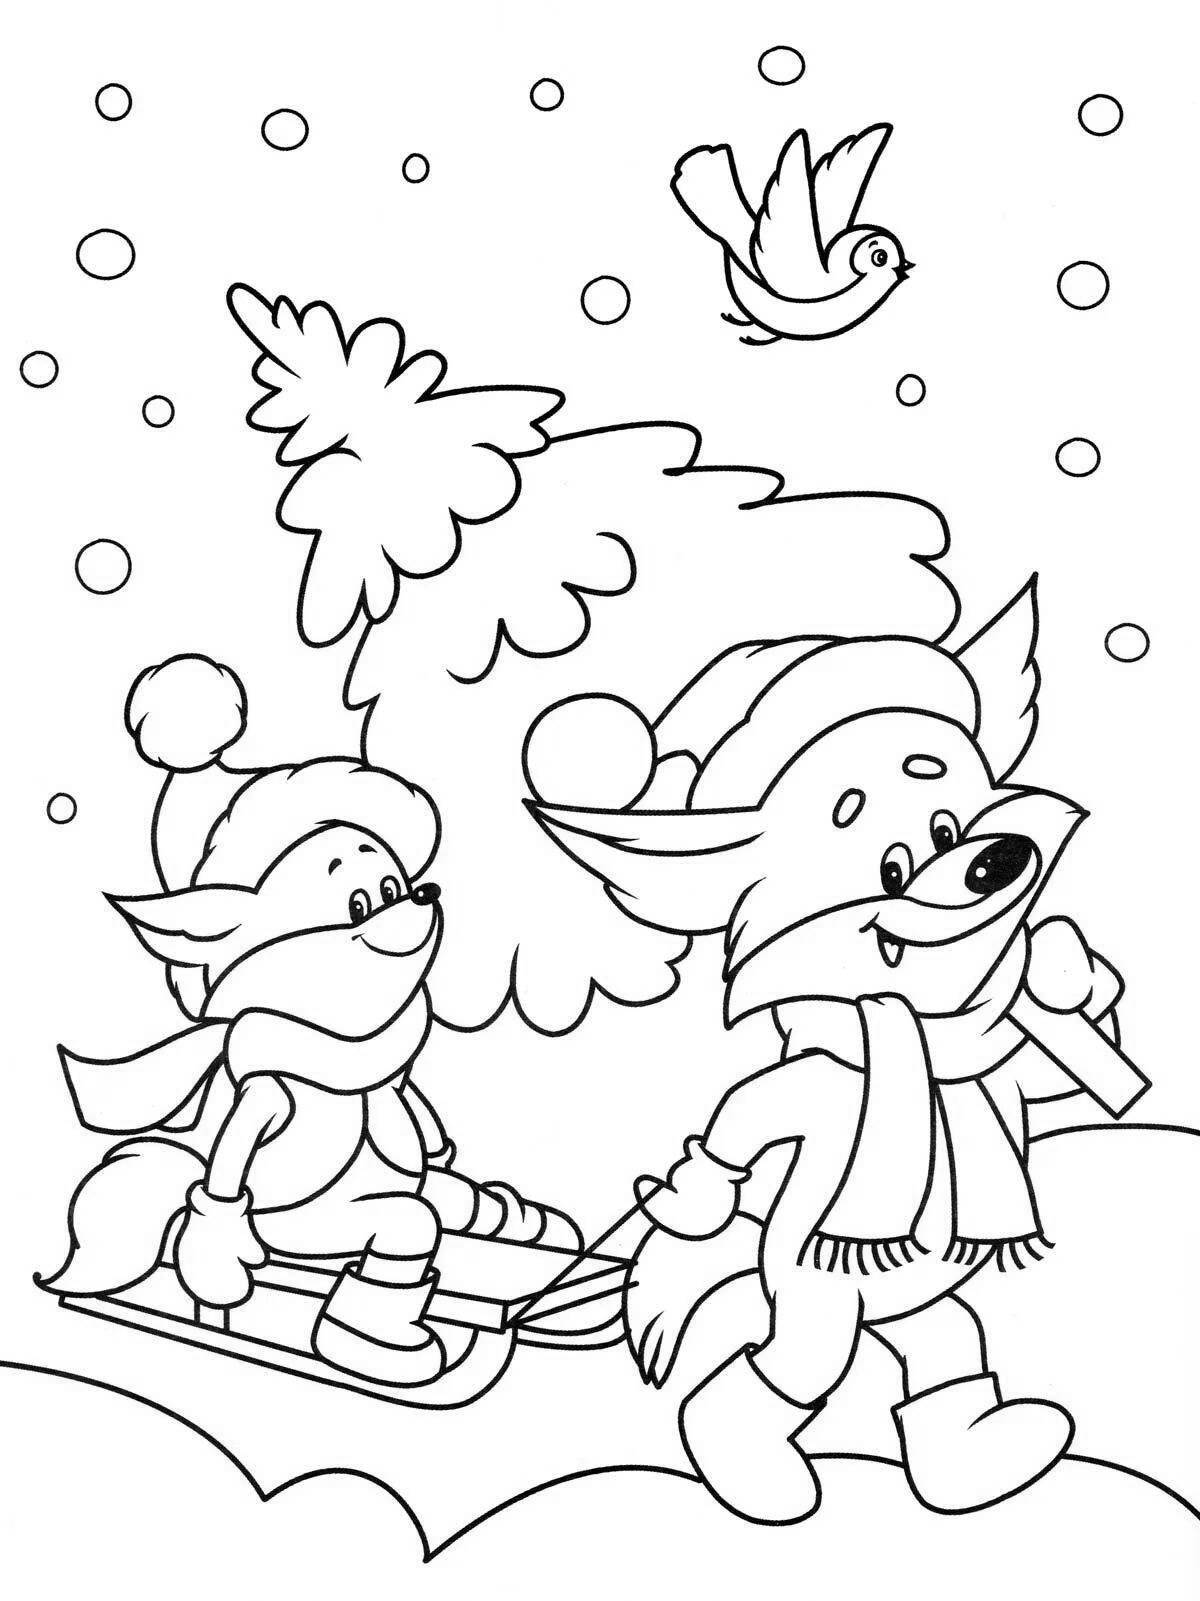 Fun winter coloring book for 3-4 year olds